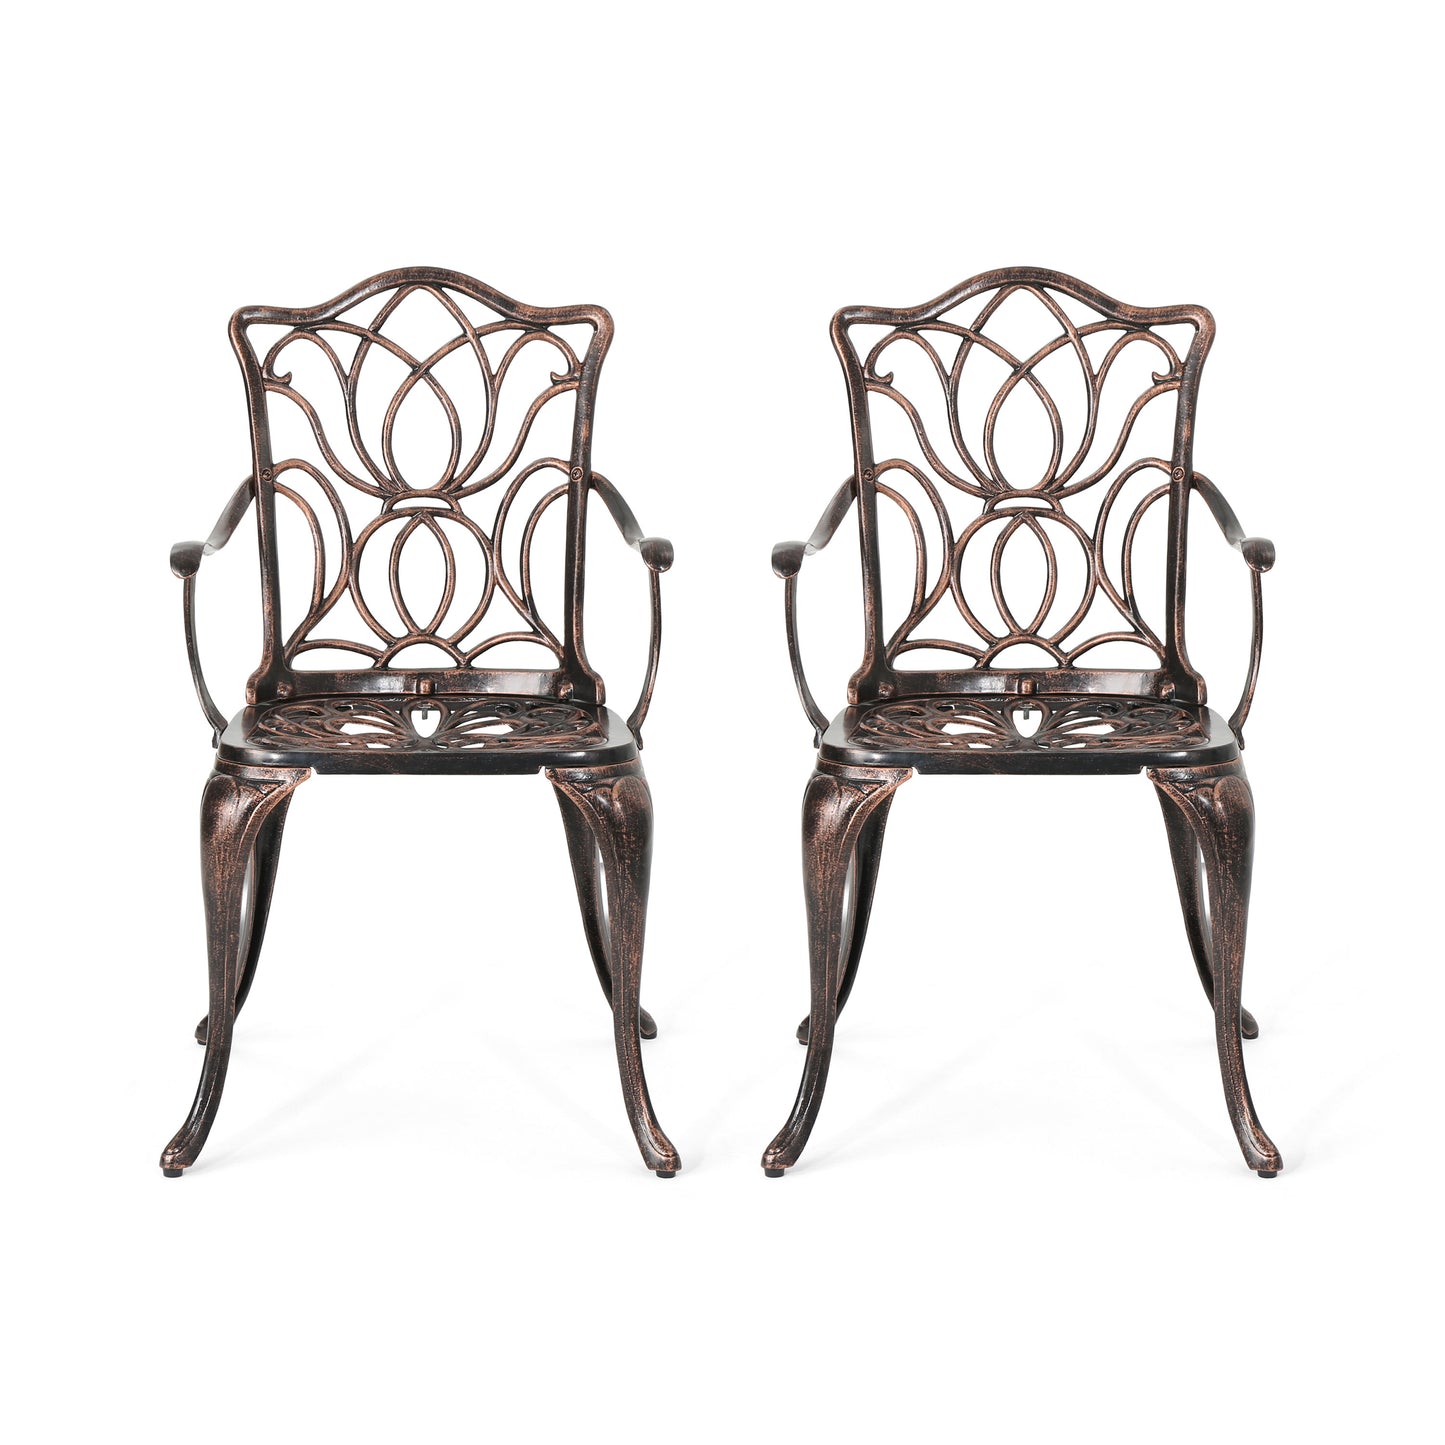 Meyer Outdoor Cast Aluminum Dining Chairs, Set of 2, Black Copper